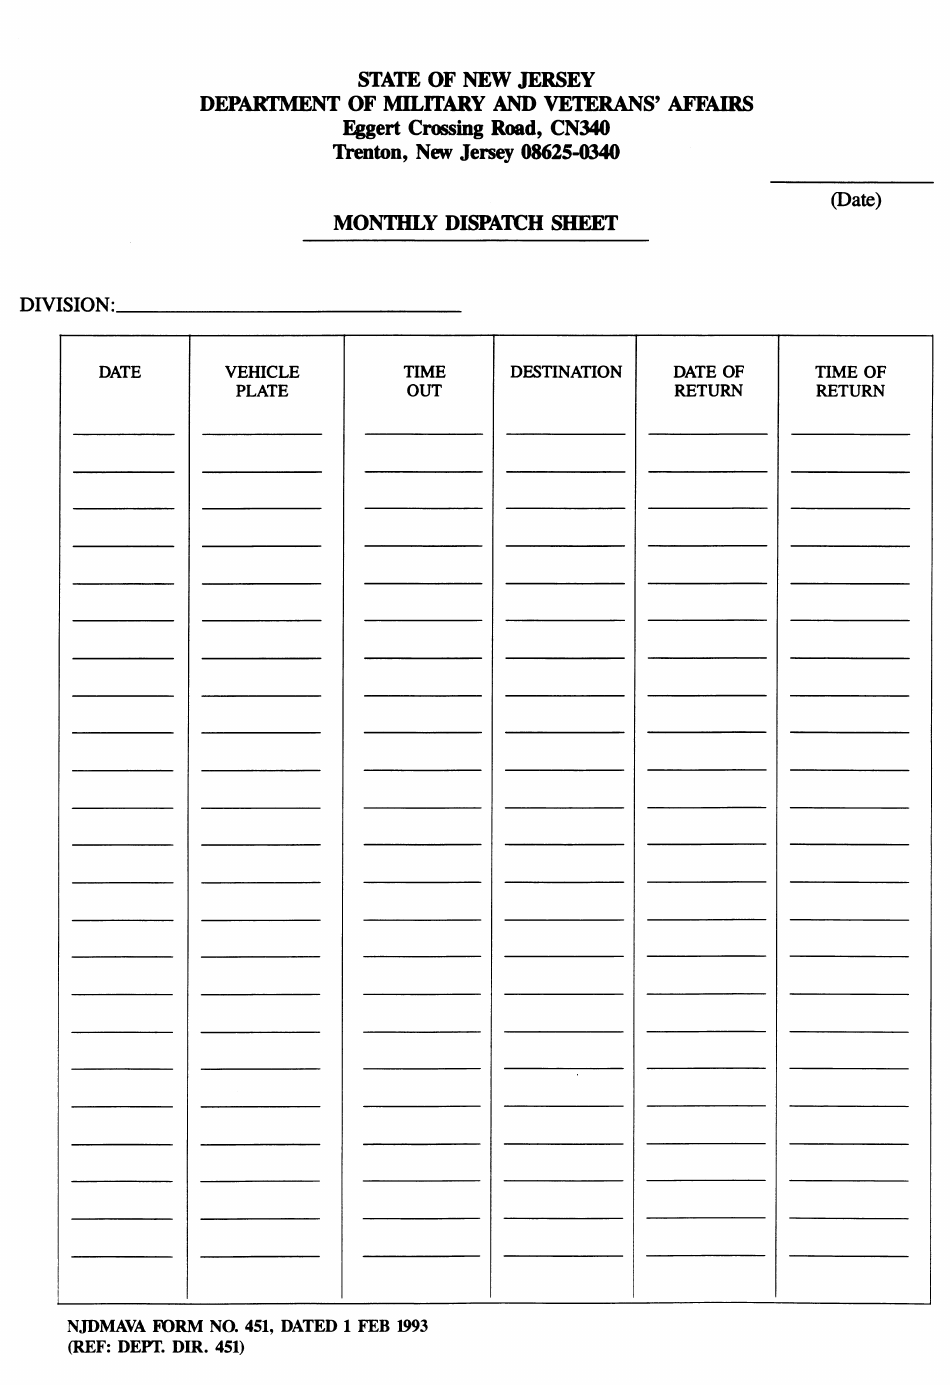 NJDMAVA Form 451 Monthly Dispatch Sheet - New Jersey, Page 1